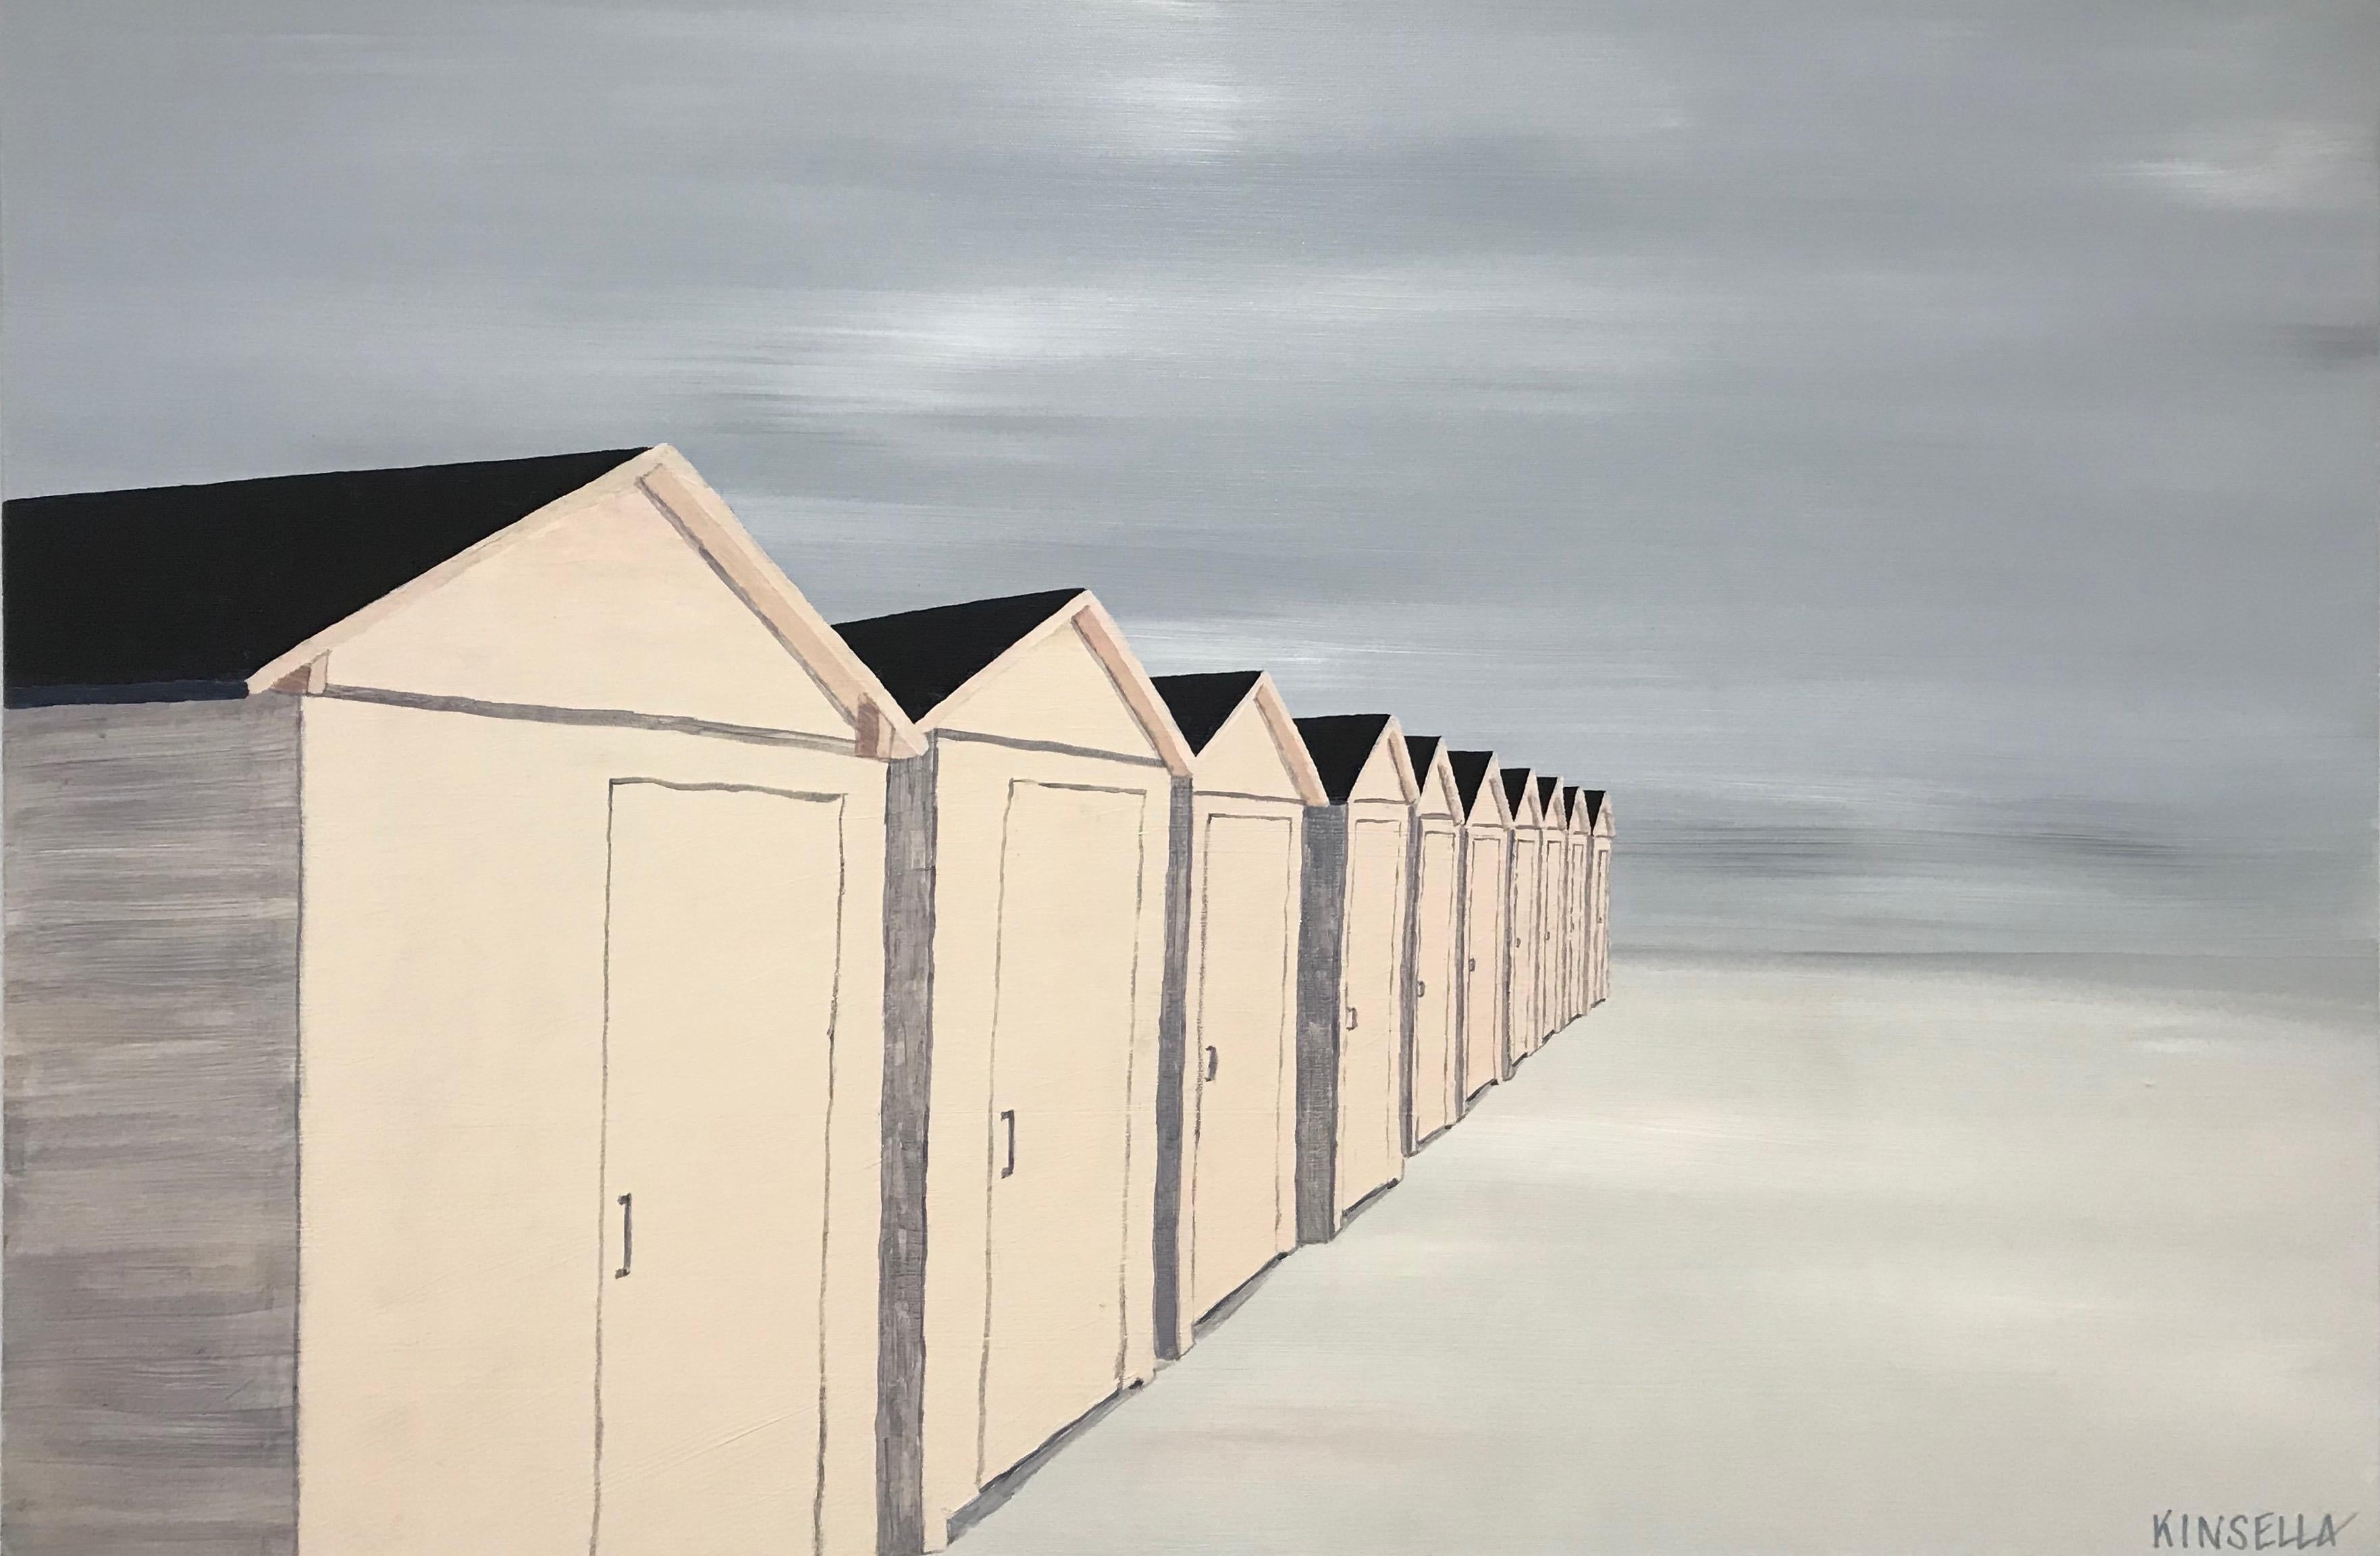 'La Couleur du Soir' is a realist horizontal oil on canvas beach painting created by American artist Susan Kinsella in 2018. Featuring a soft palette mostly made of beige, light grey and black color, the painting exudes an undeniable air of